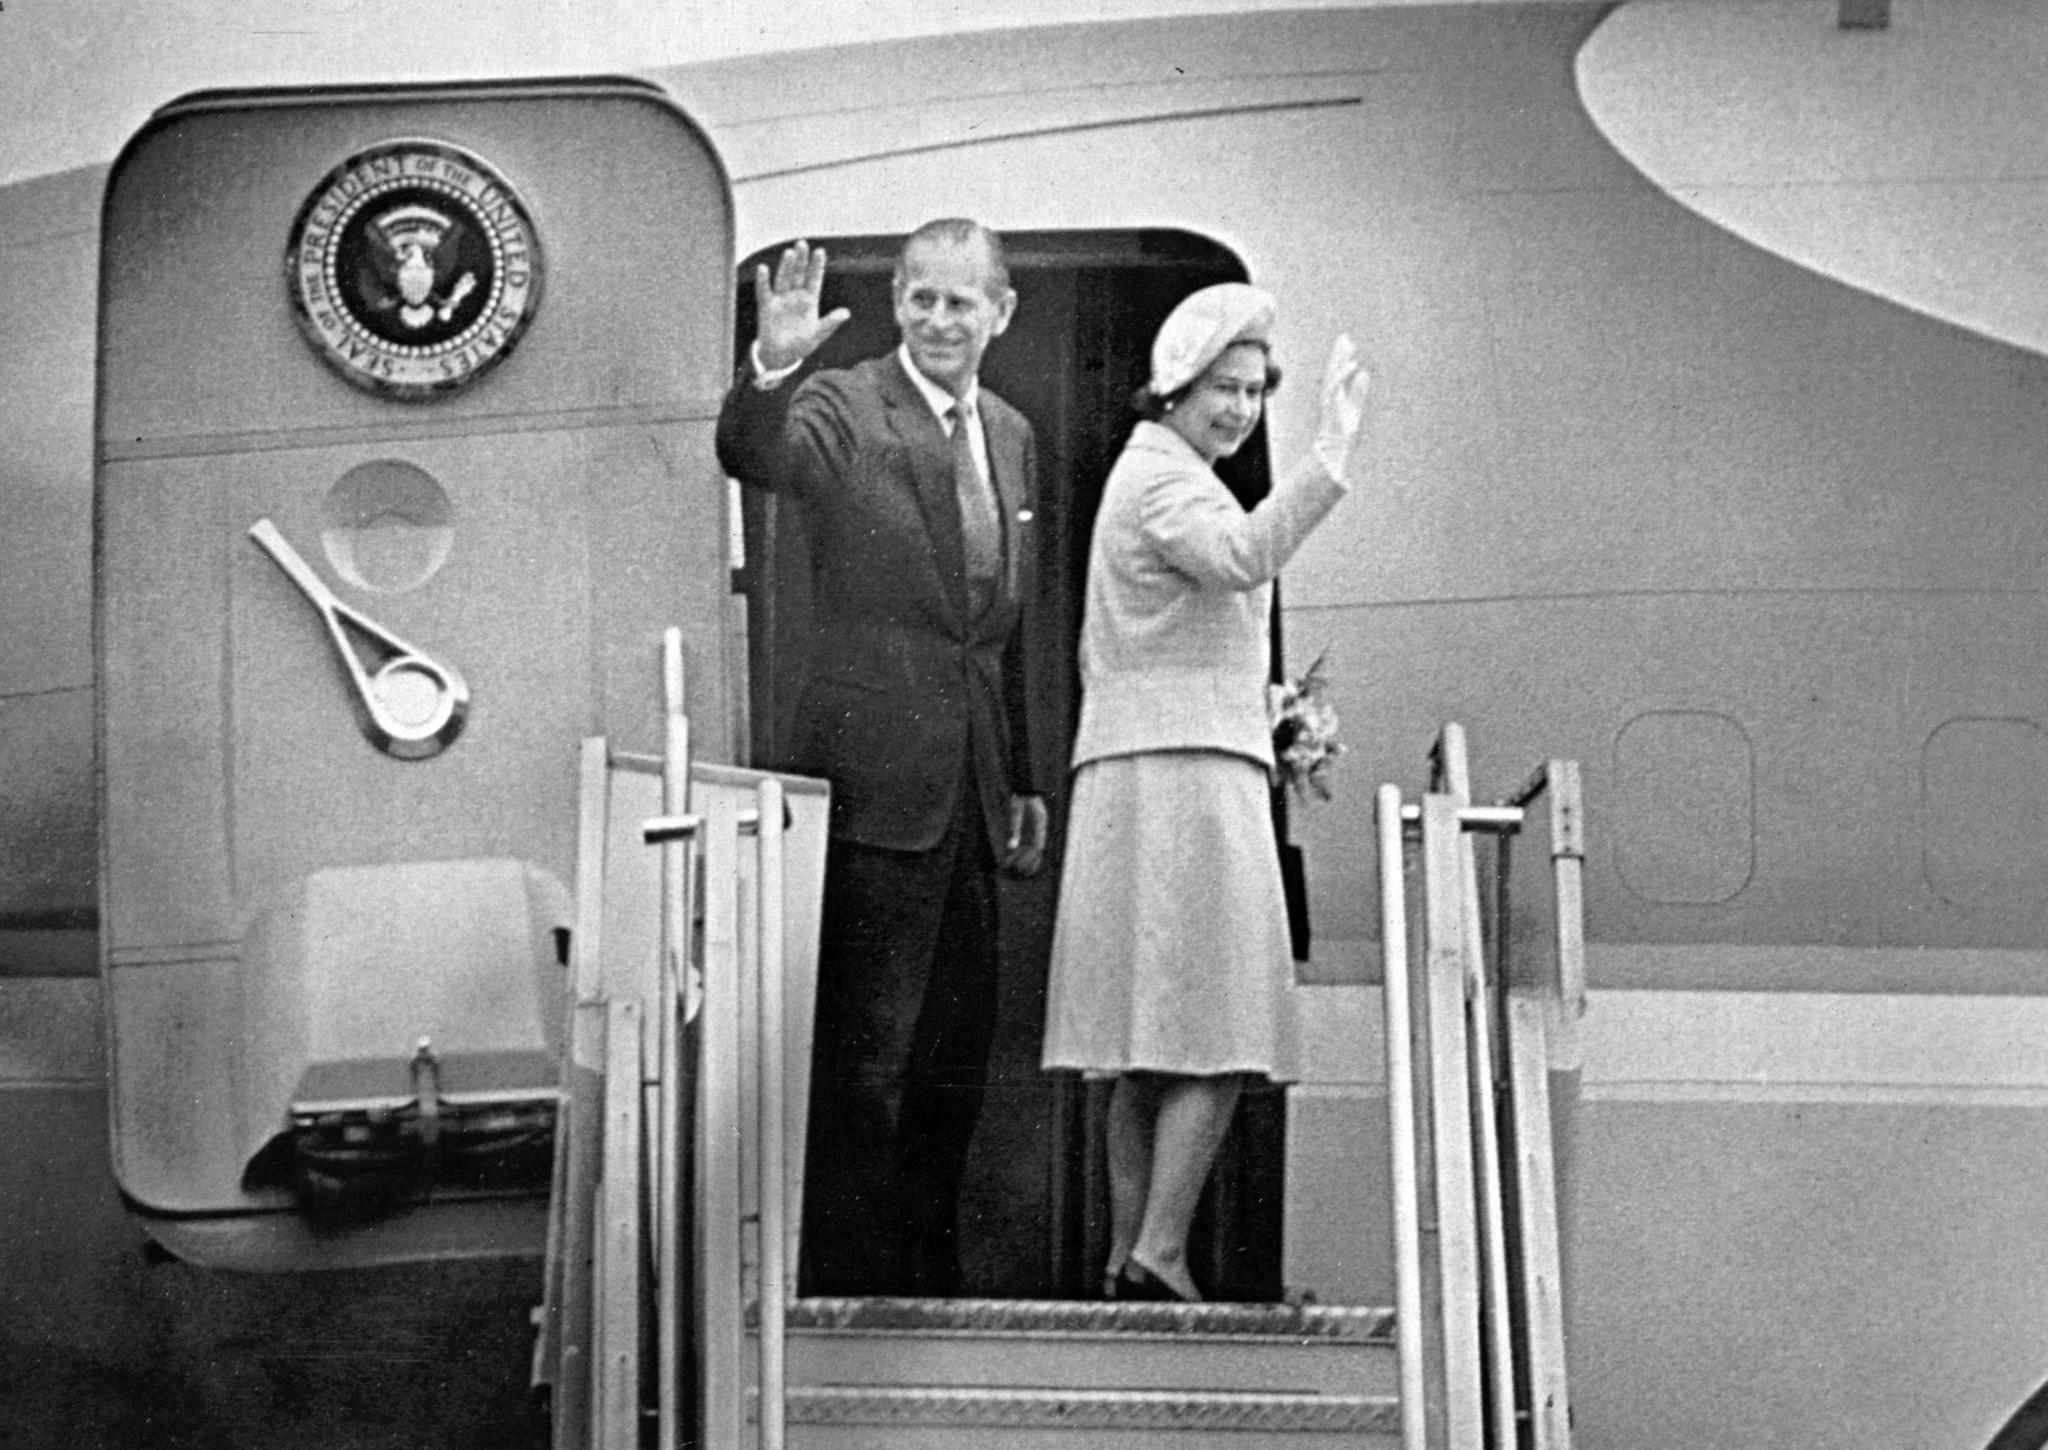 Feb. 27, 1983: Queen Elizabeth II and Prince Philip board Air Force II in San Diego for trip to Palm Springs. This photo was published in the Feb. 28, 1983, Los Angeles Times.